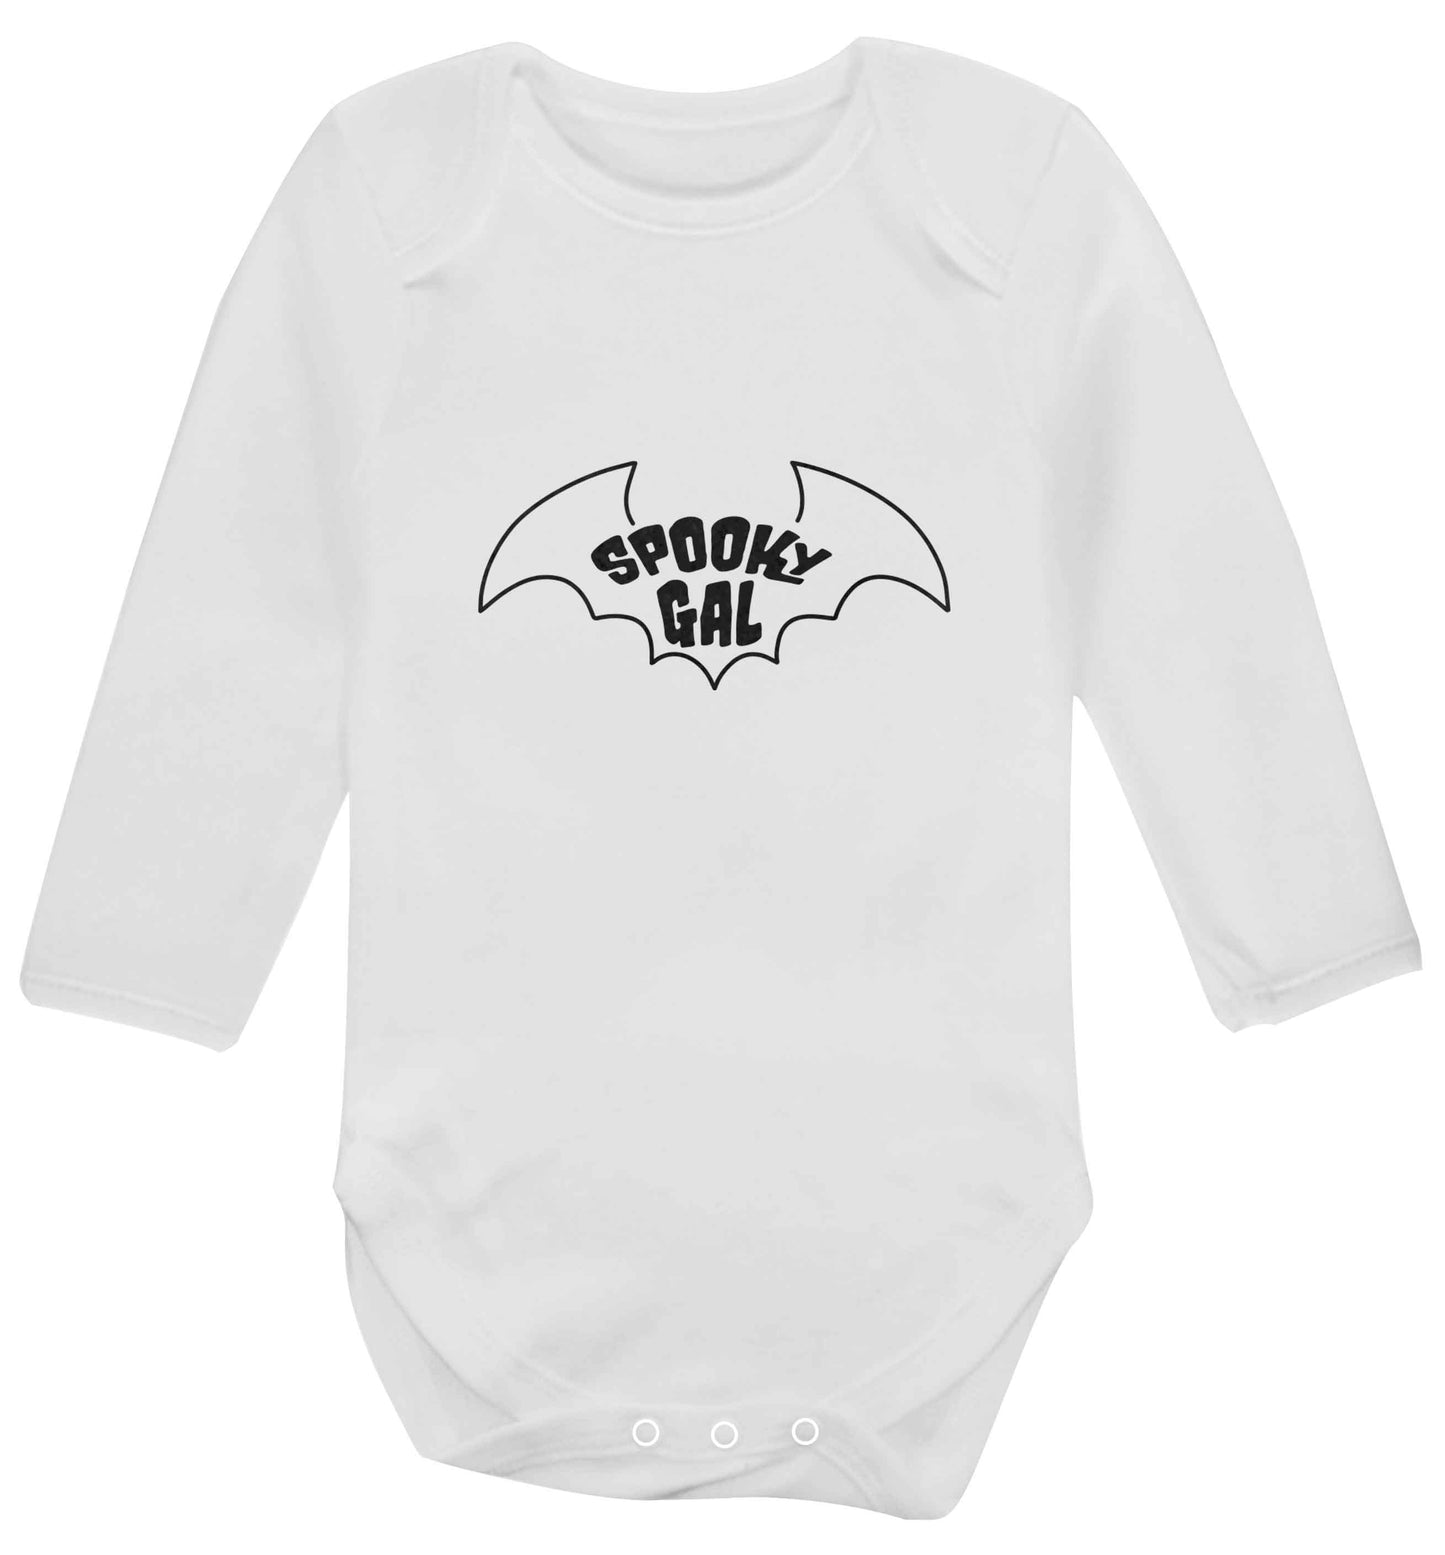 Spooky gal Kit baby vest long sleeved white 6-12 months